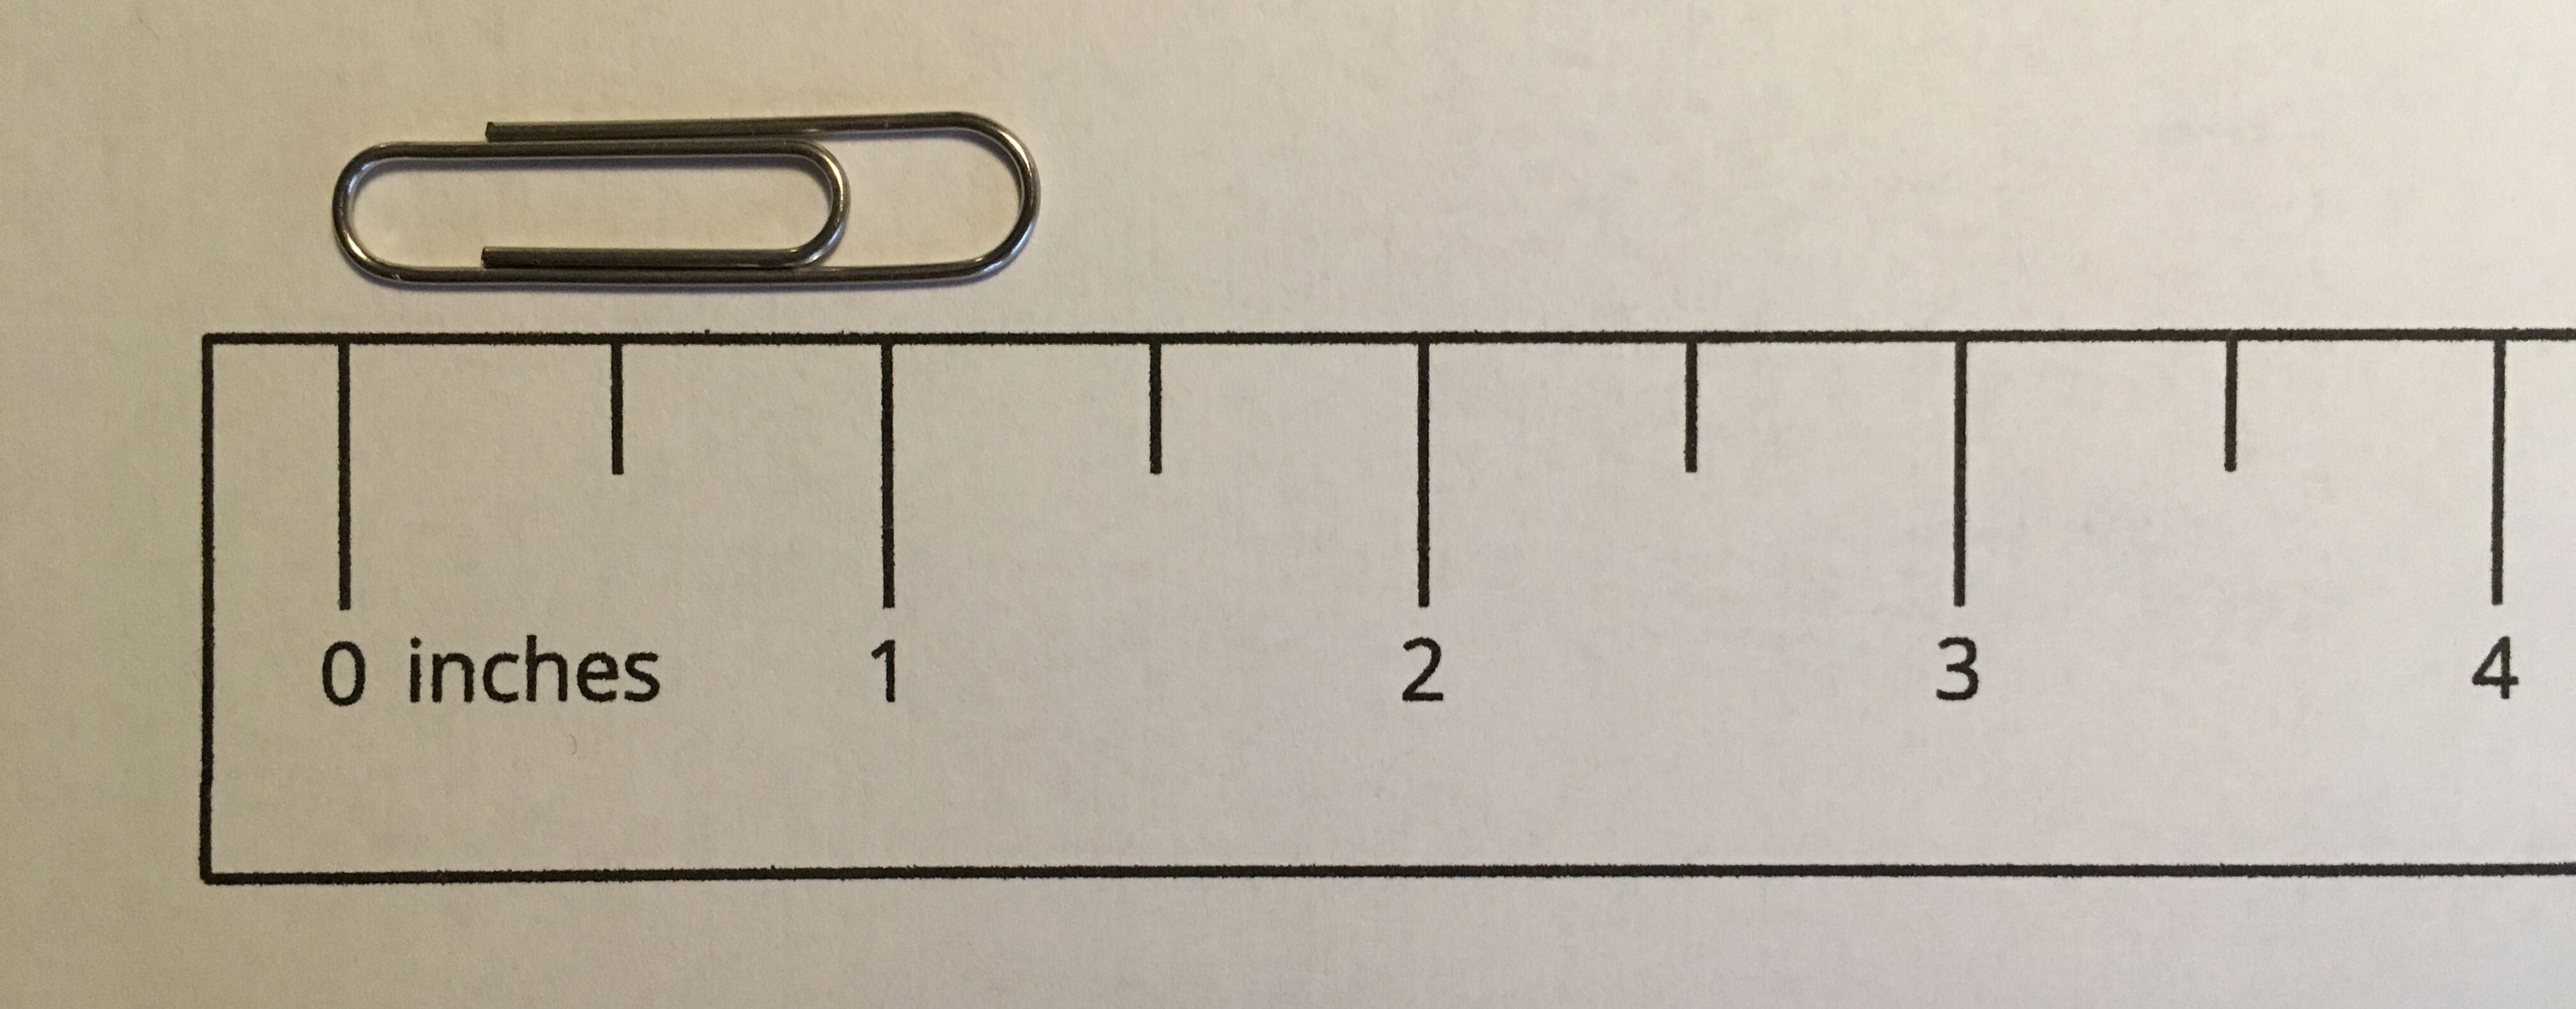 Paper clip measured by a ruler in inches.